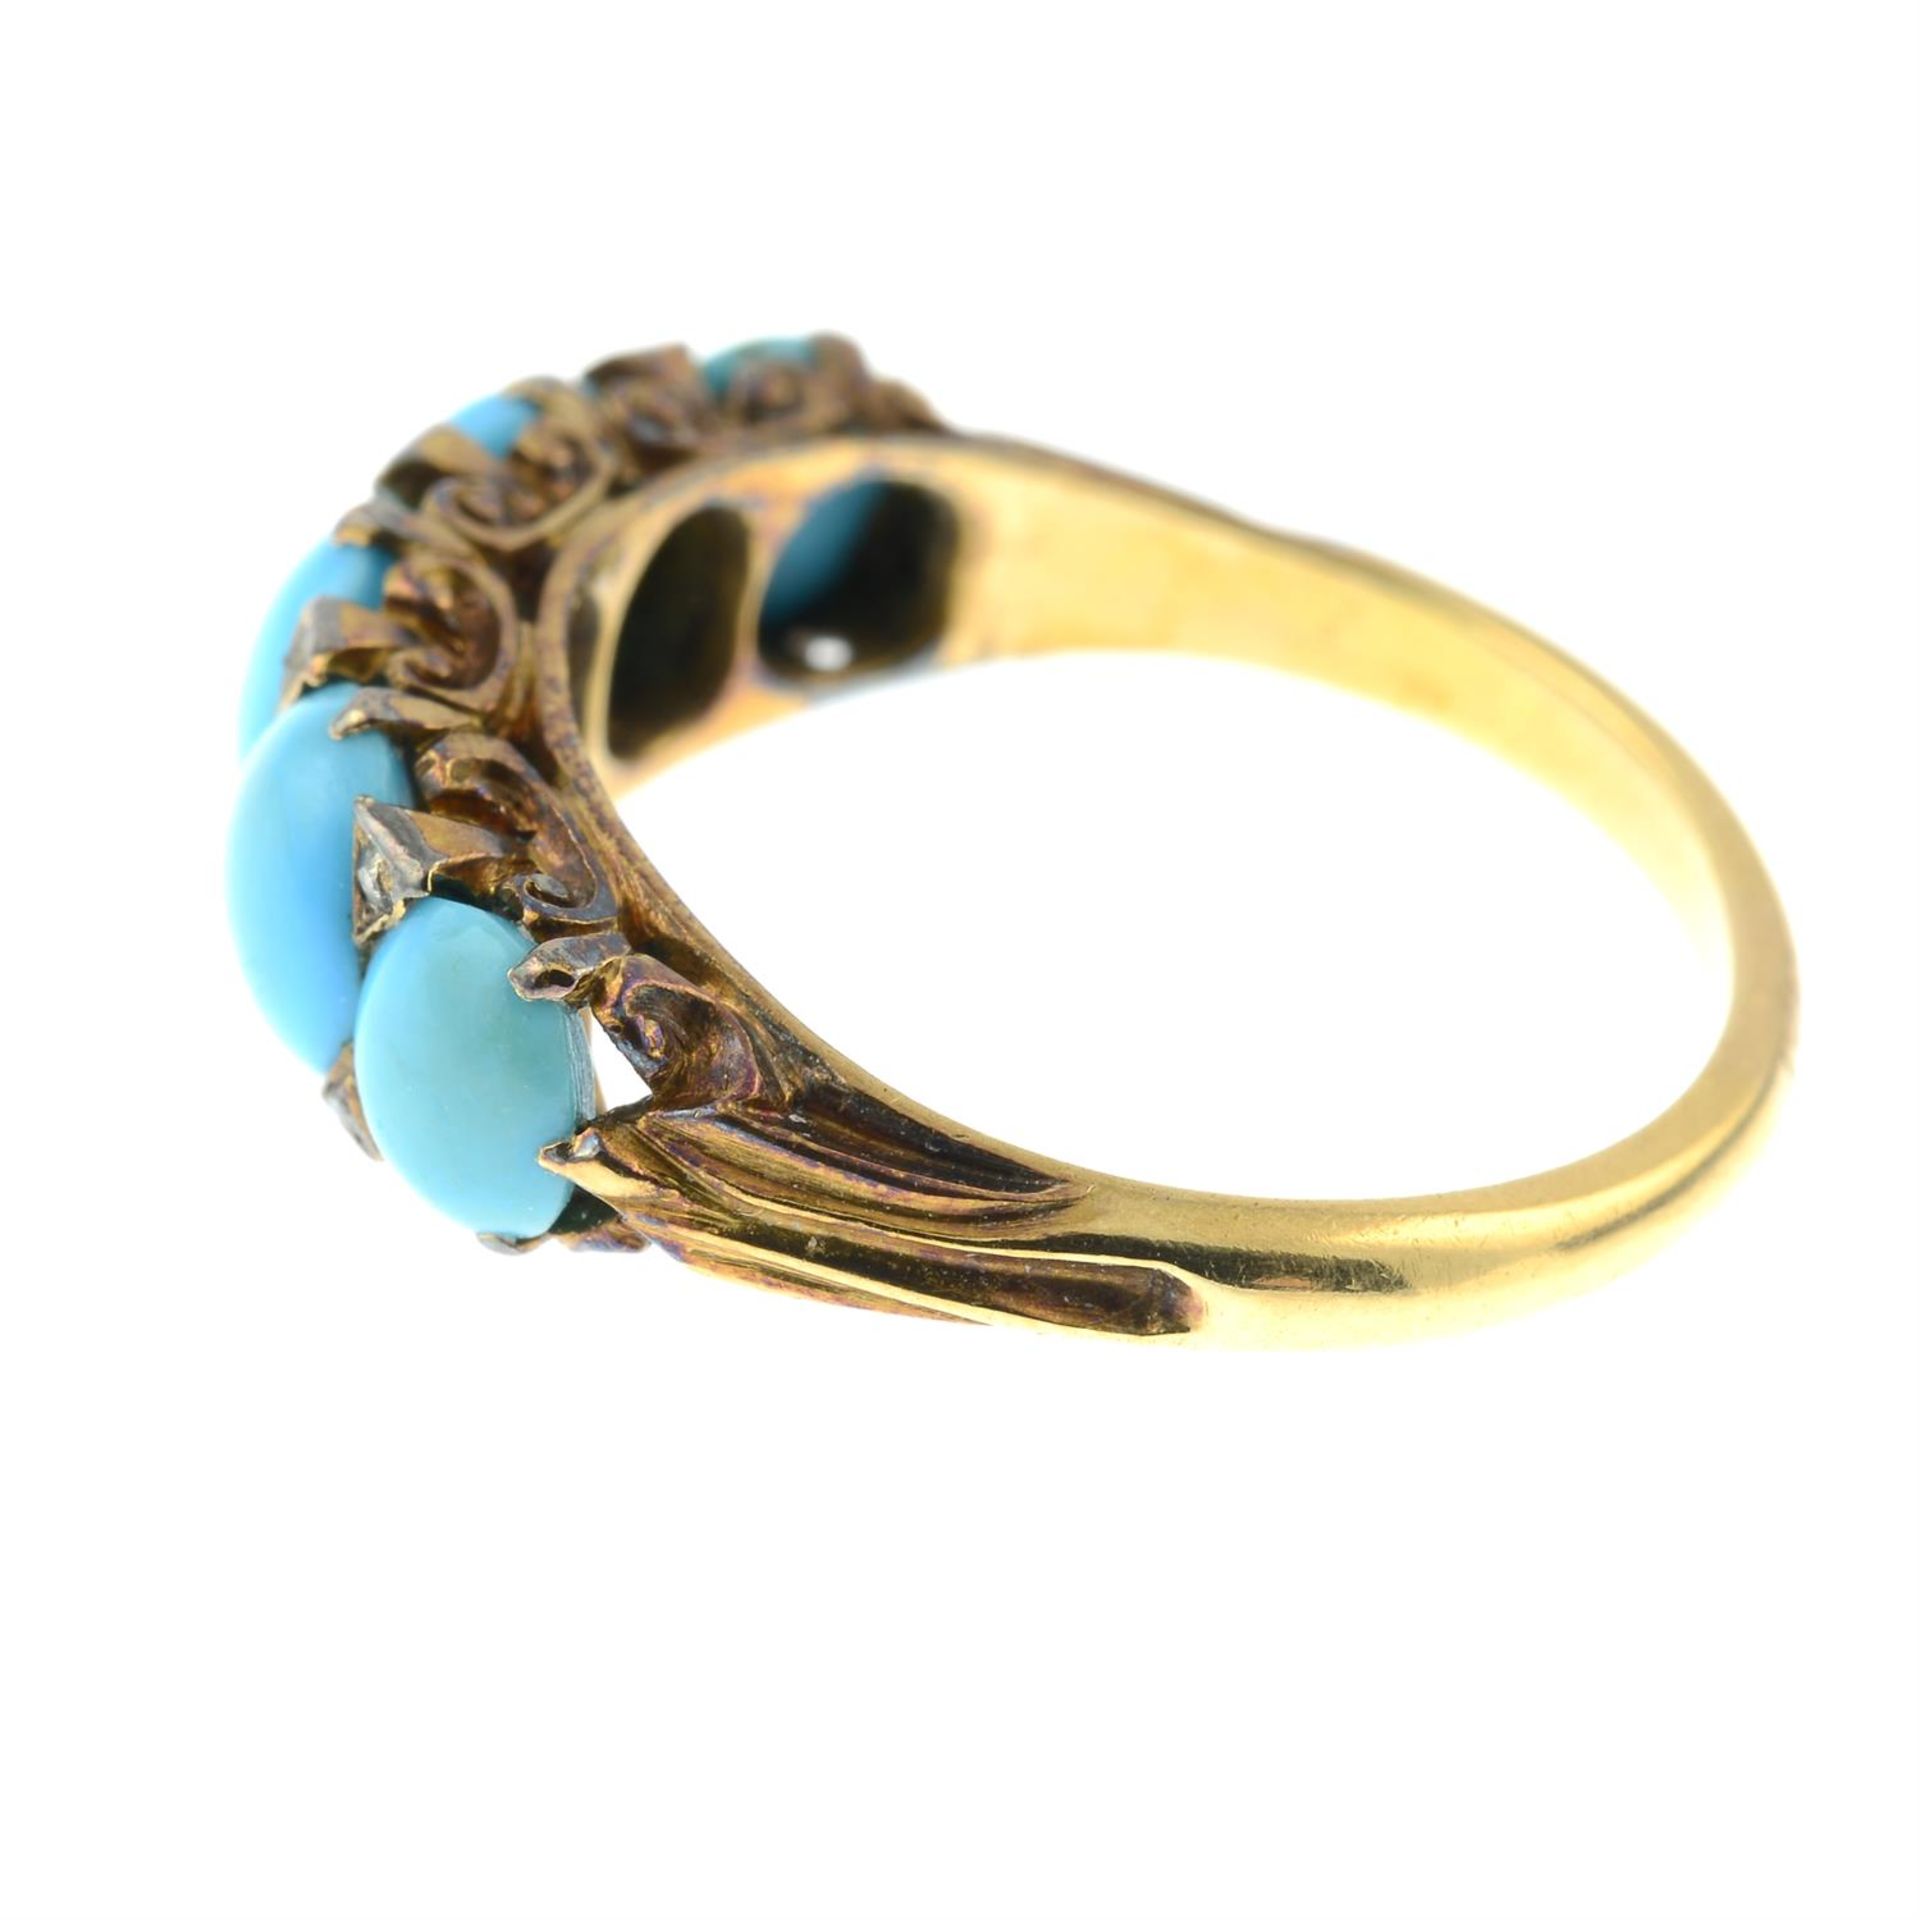 An early 20th century 18ct gold turquoise and rose-cut diamond ring. - Image 2 of 3